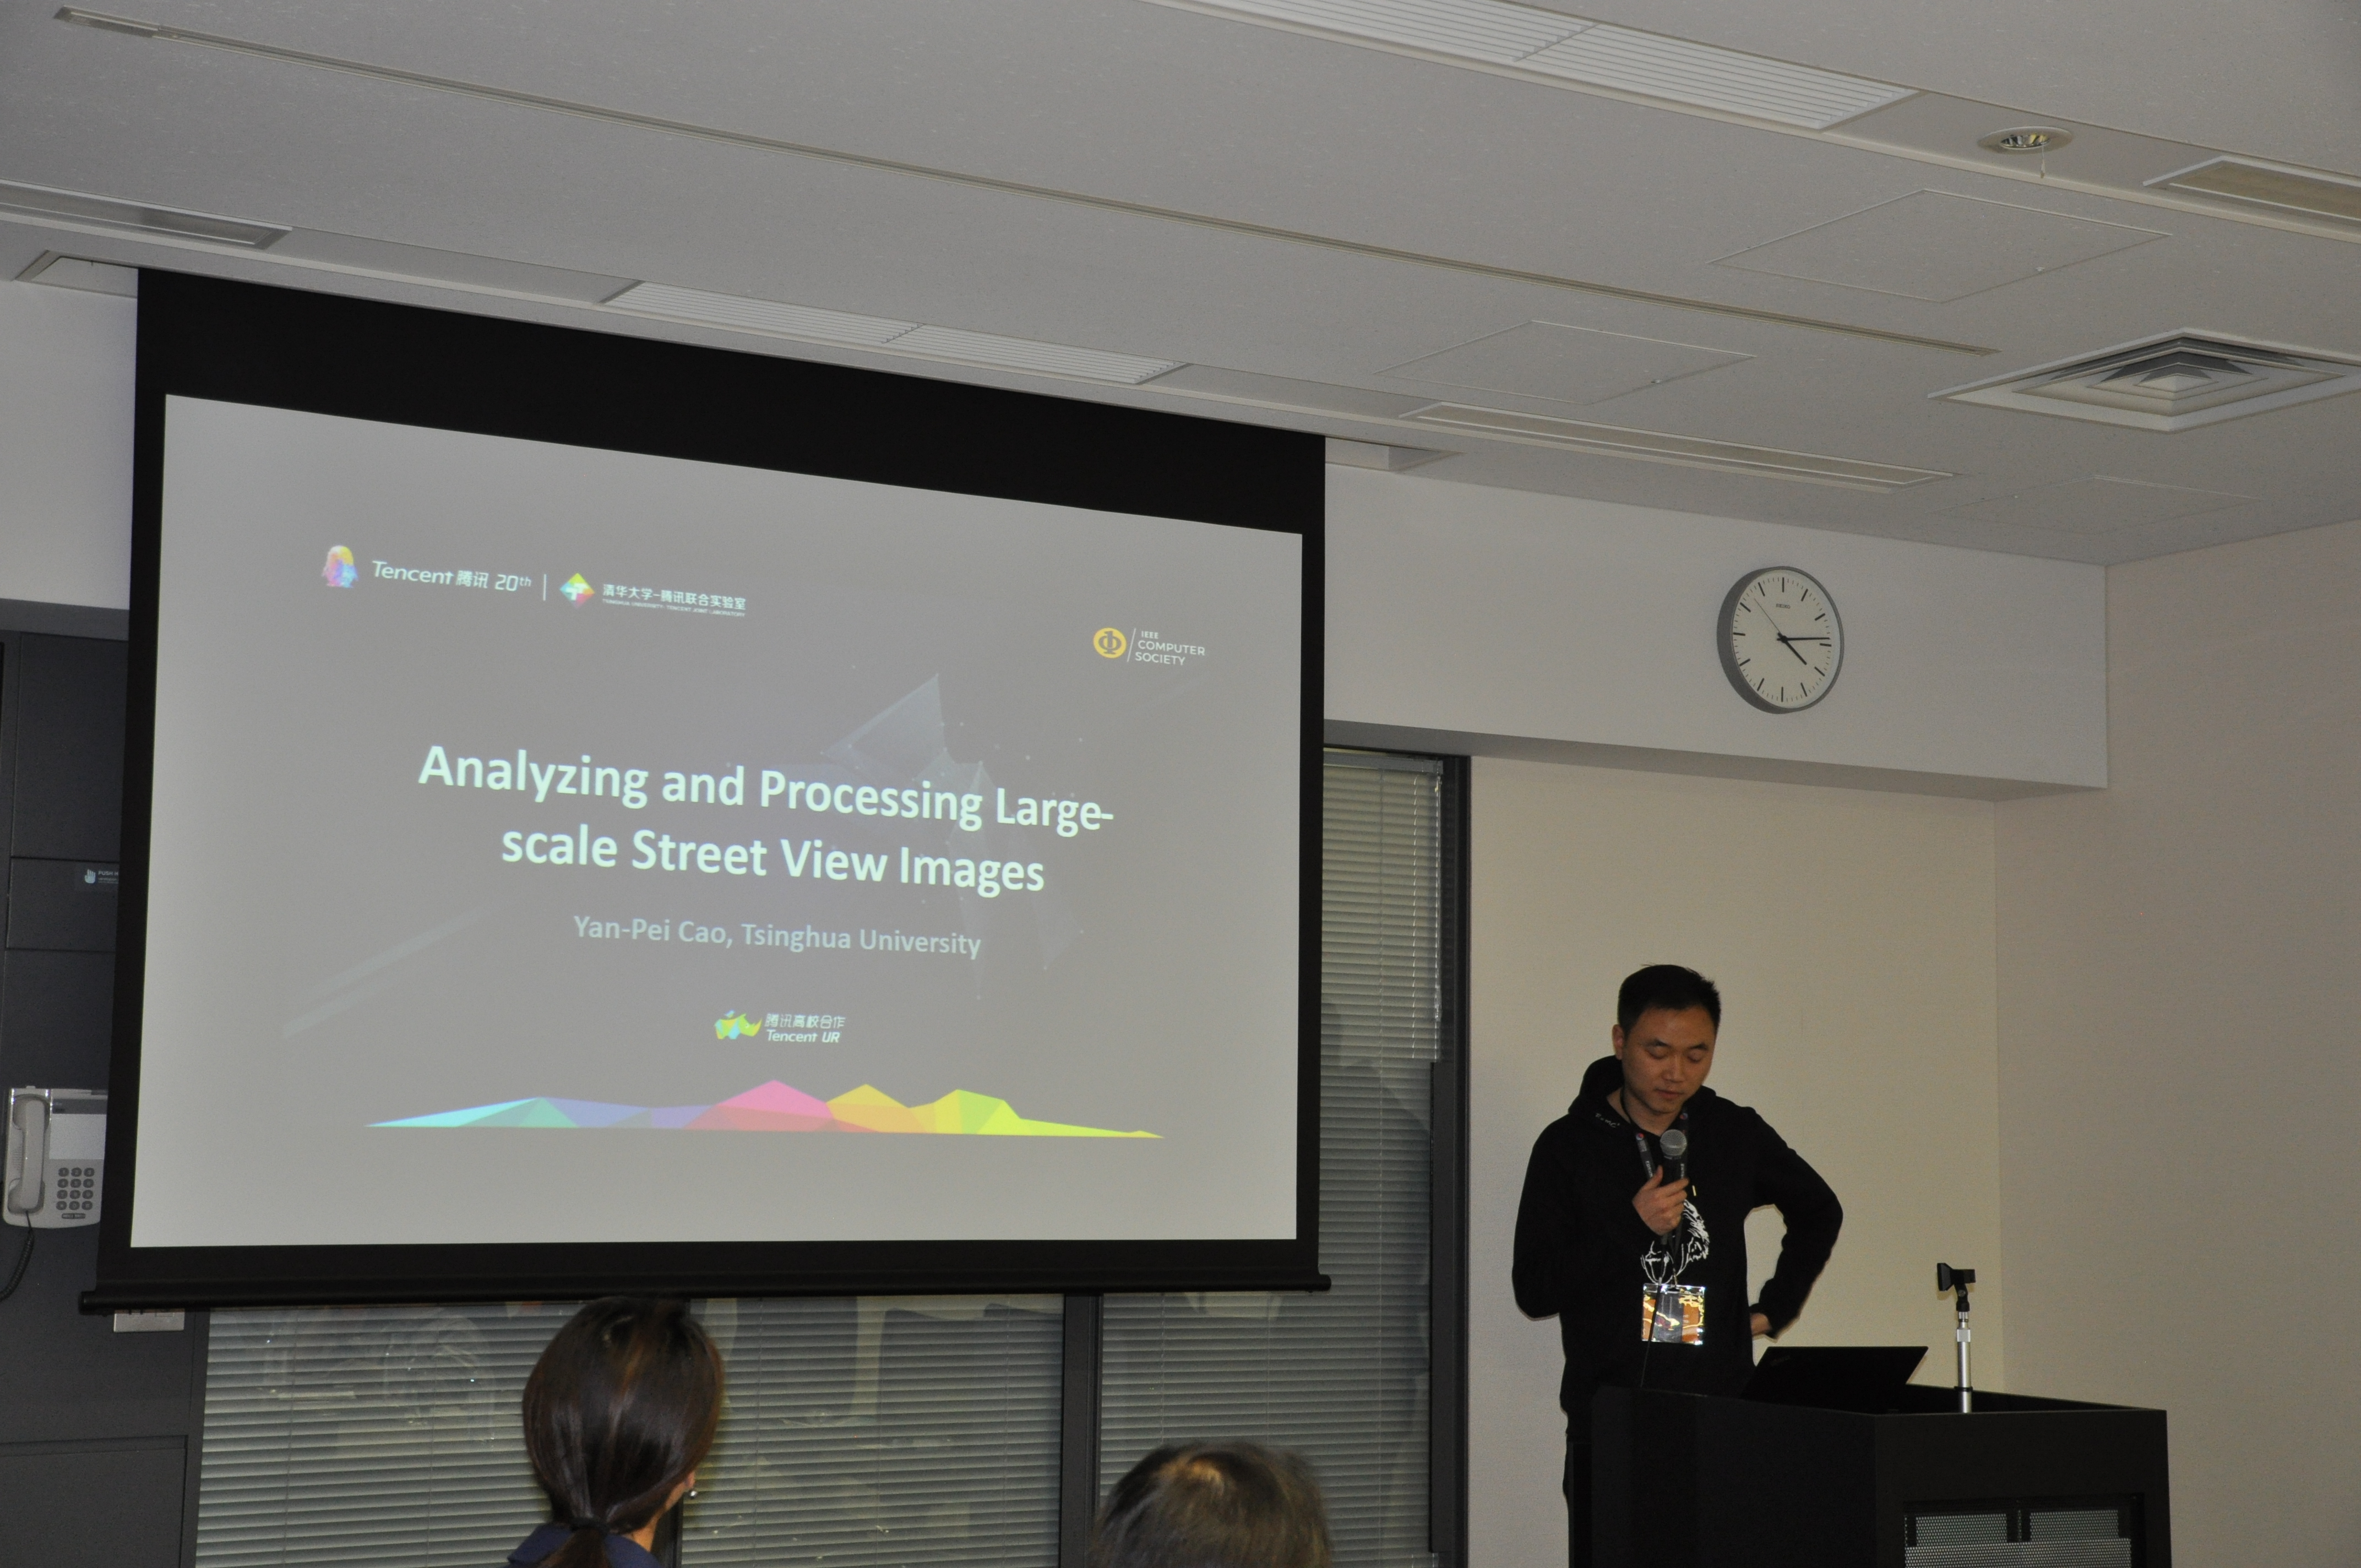 Researcher Yan-Pei Cao of Tsinghua University gives a presentation about "Analyzing and Processing Large-scale Street View Images" at a gathering between Tencent and IEEE Computer Society officials at Waseda University in Japan.